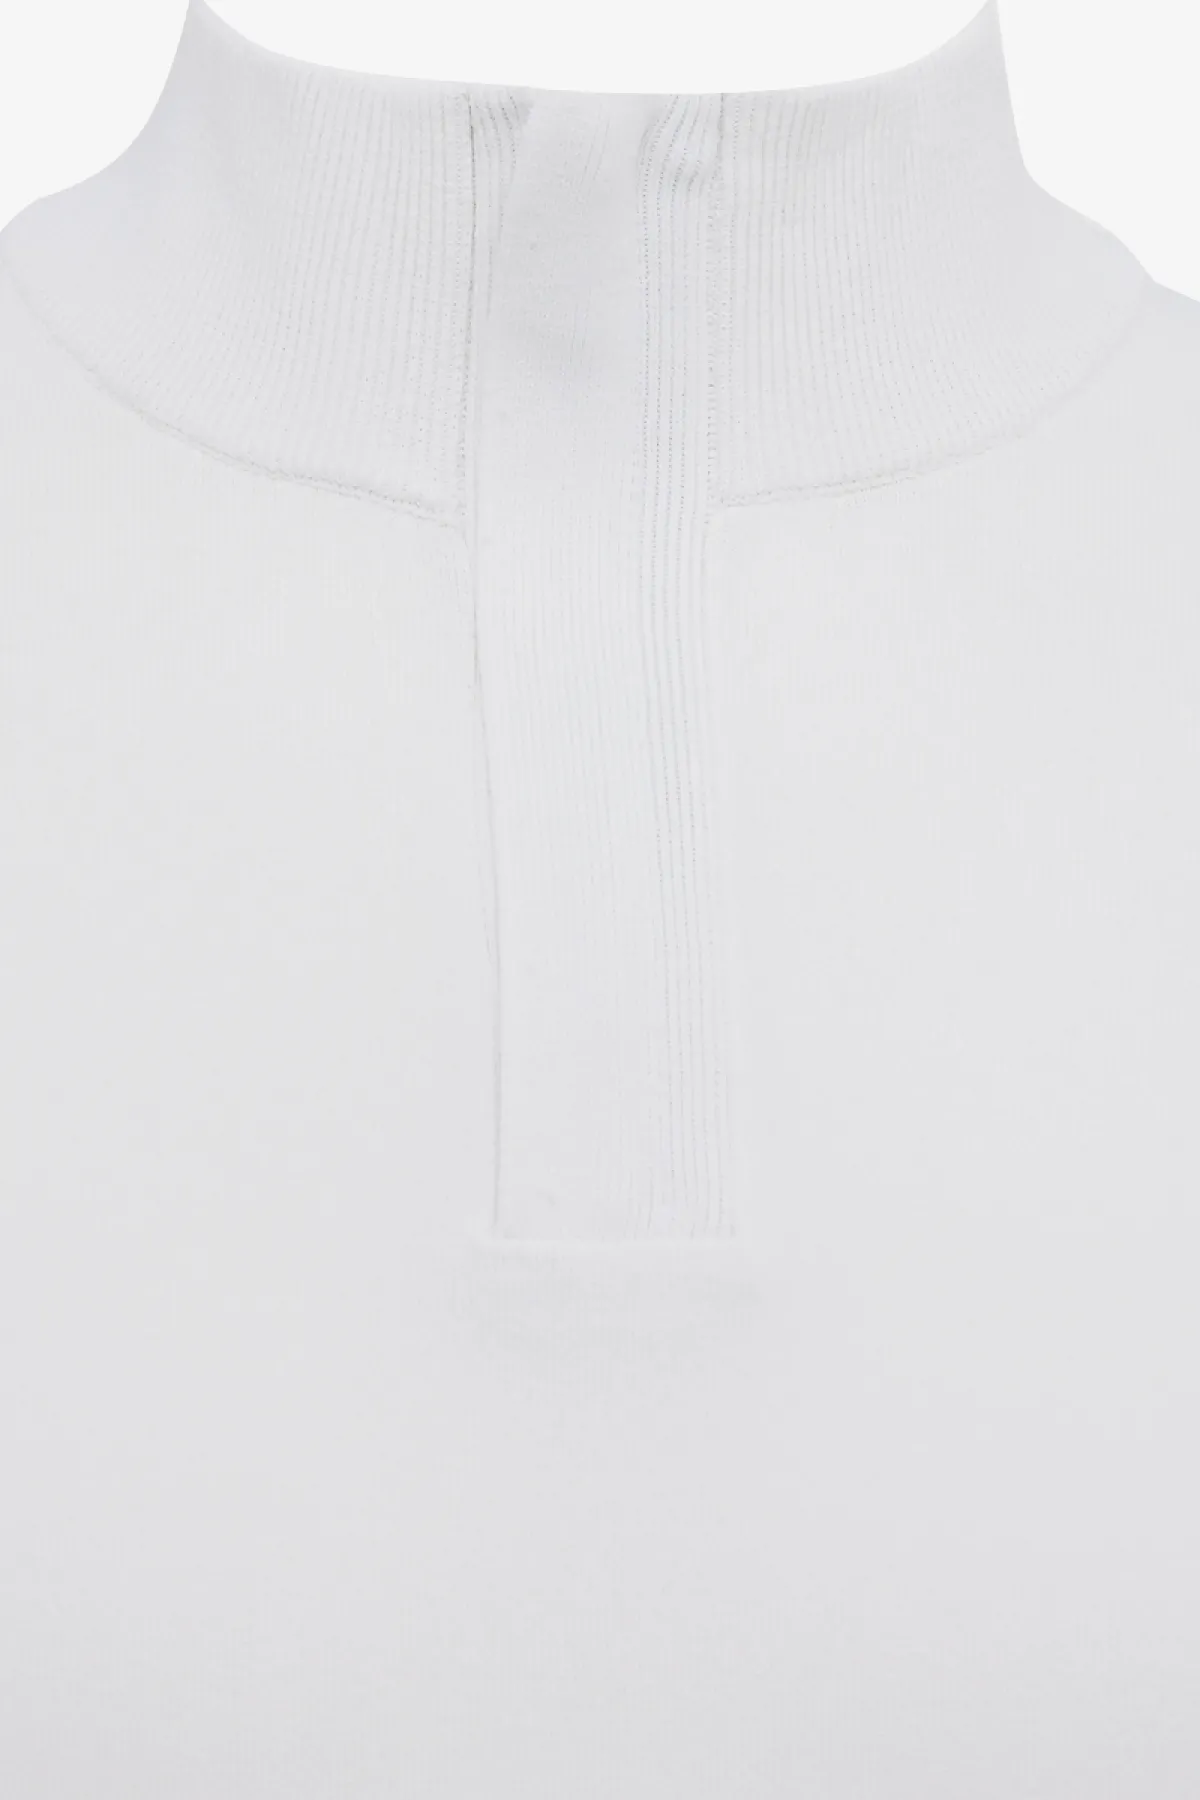 Cool dry turtle zip off-white